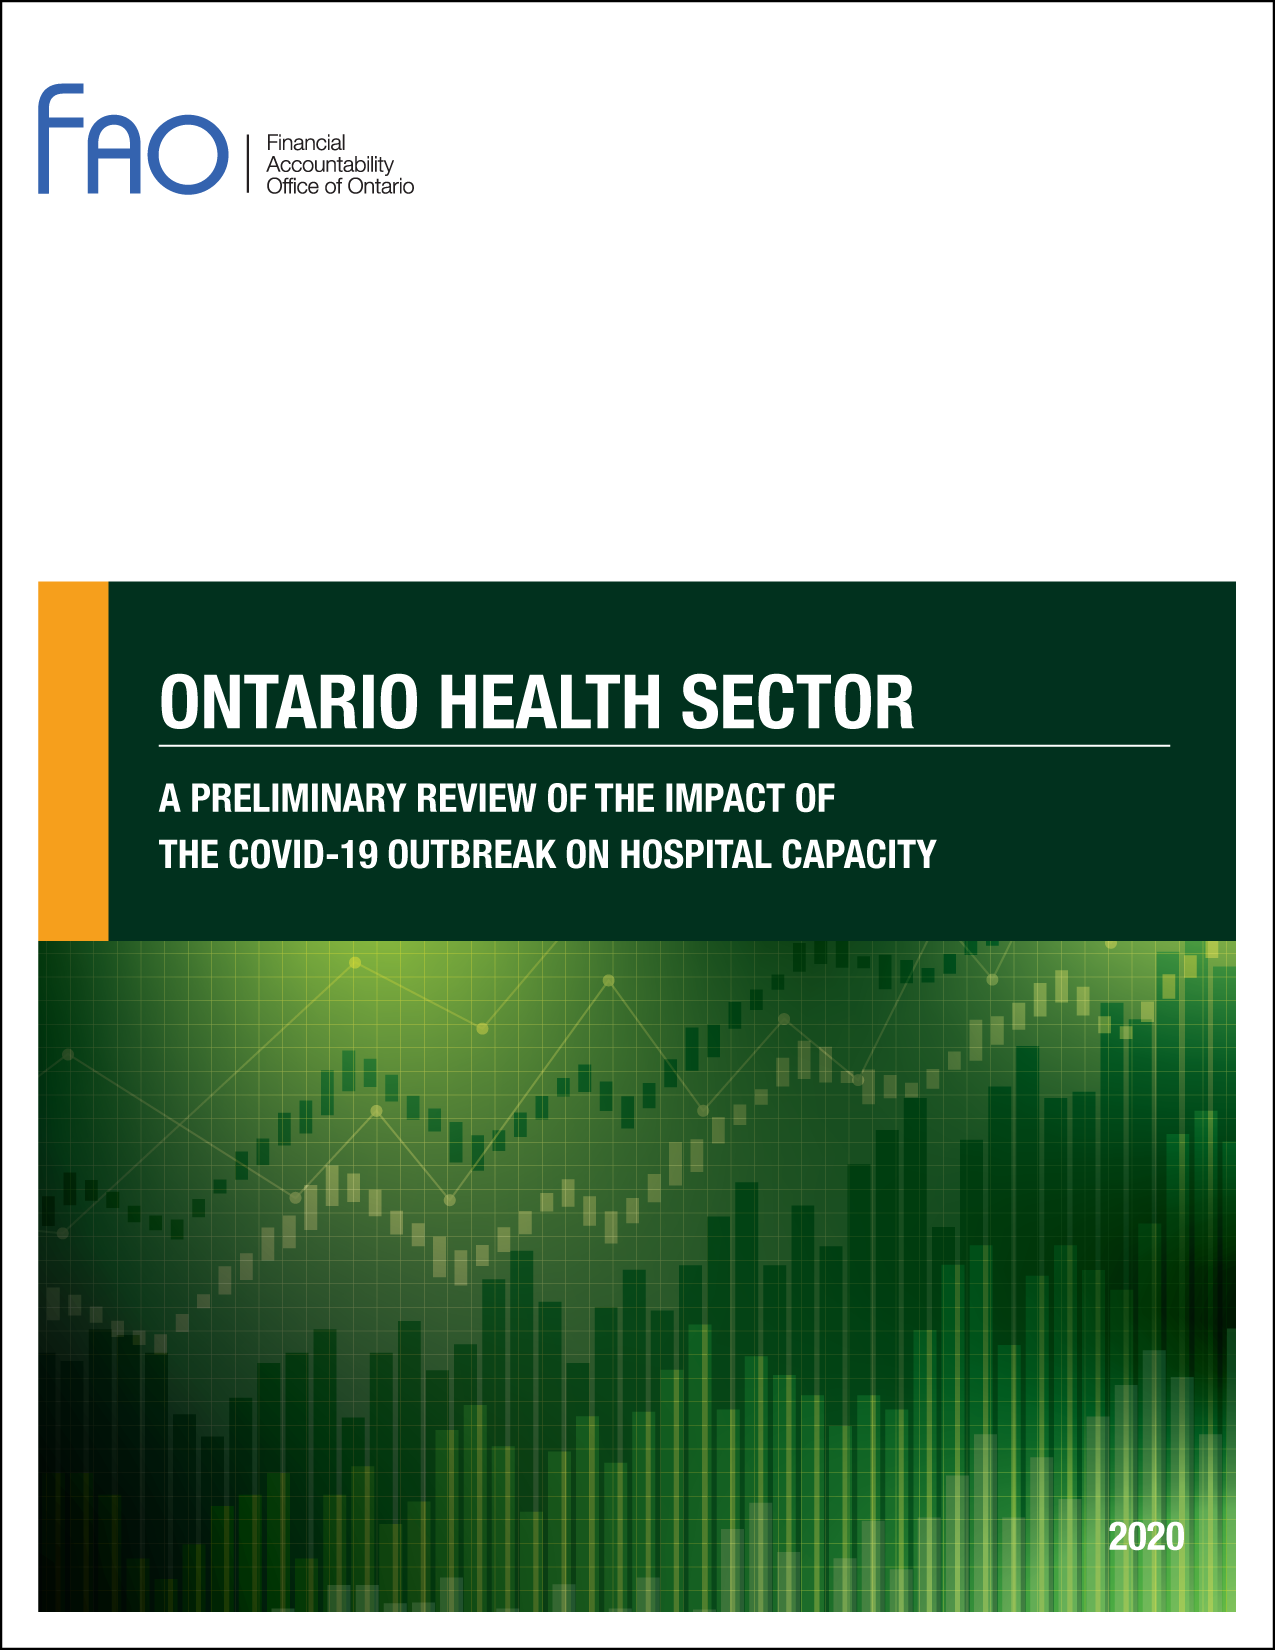 Ontario Health Sector: A Preliminary Review of the Impact of the COVID-19 Outbreak on Hospital Capacity